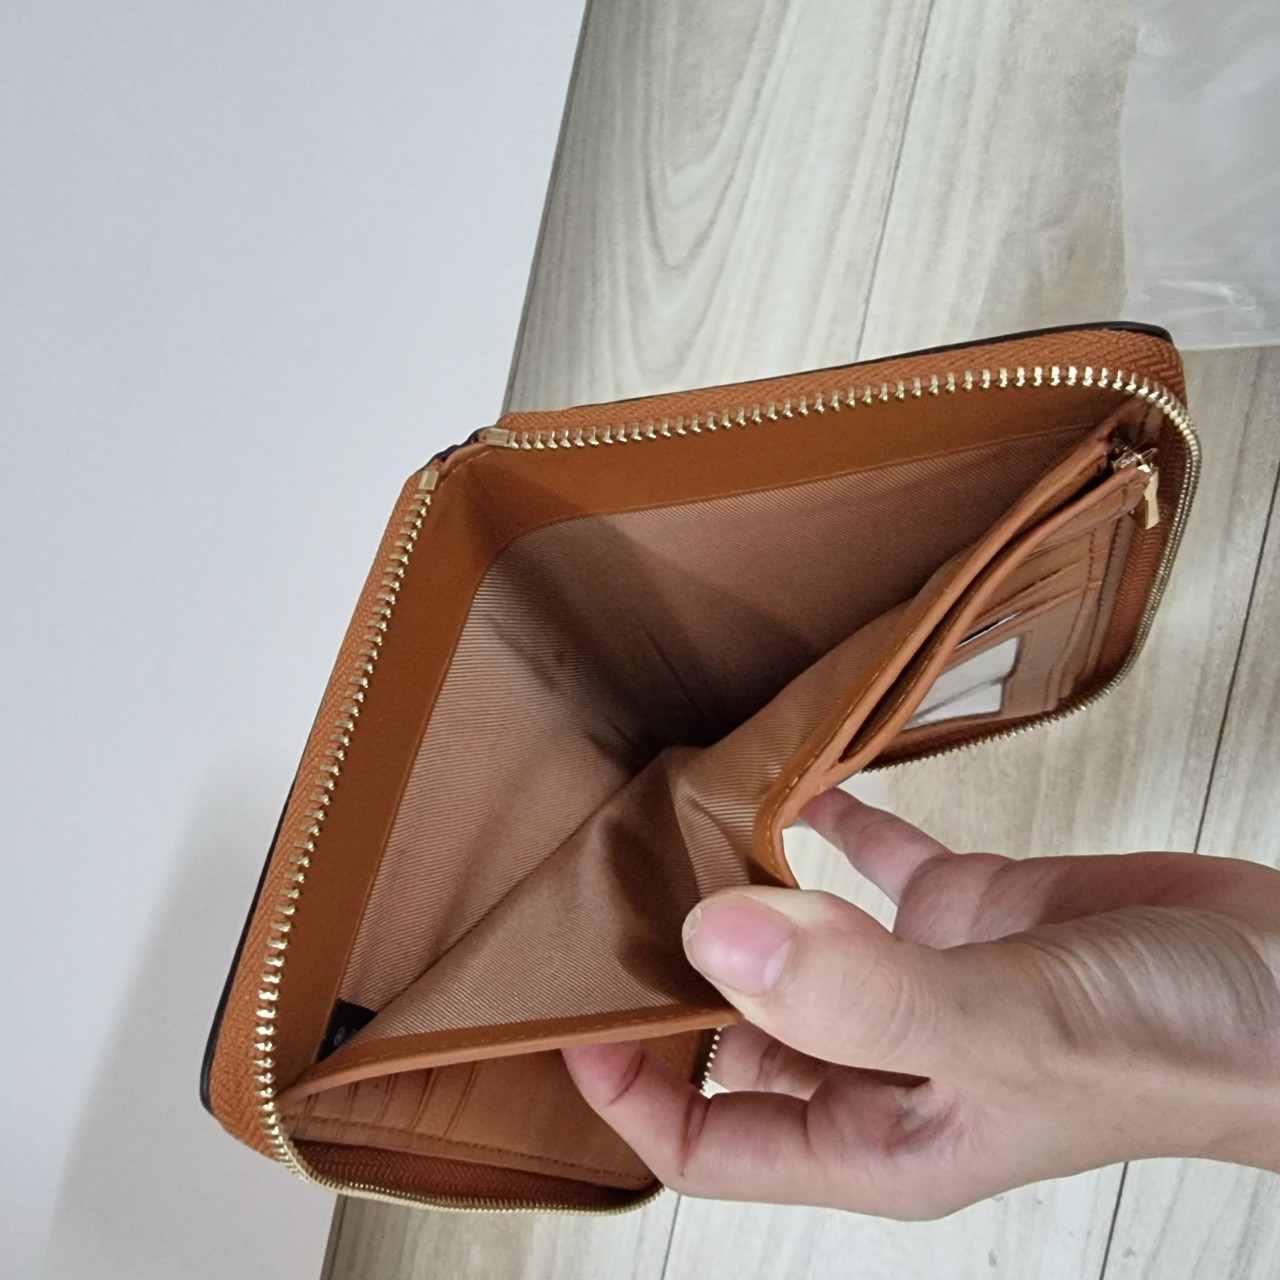 VÍ DÀI NỮ BROWN COACH MEDIUM ID ZIP WALLET WITH DIARY EMBROIDERY 6